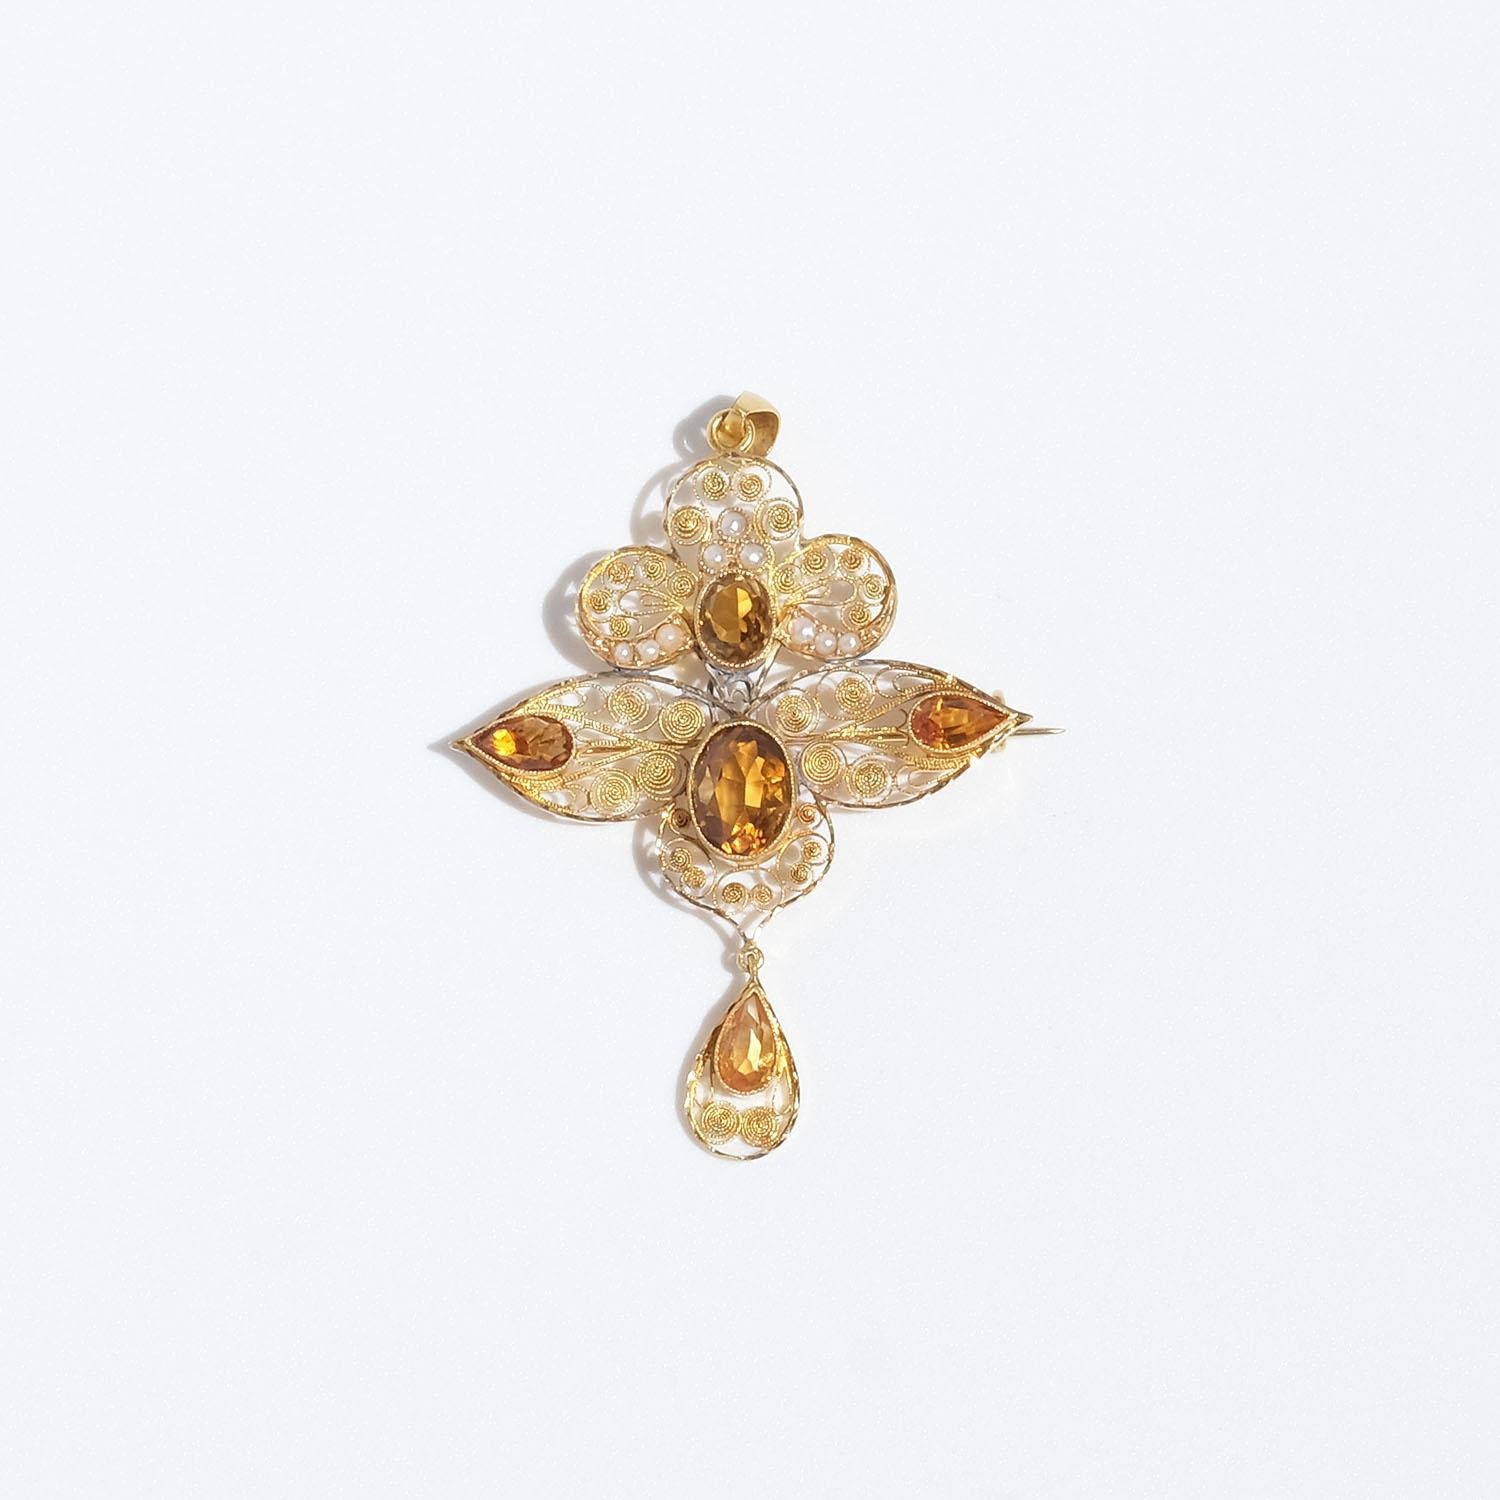 This 18 karat gold brooch is adorned with five flame-coloured, oval and drop-cut faceted, citrines and nine seed beads. The brooch is mainly made of very fine threads that have been soldered together in a beautiful pattern. The brooch is equipped